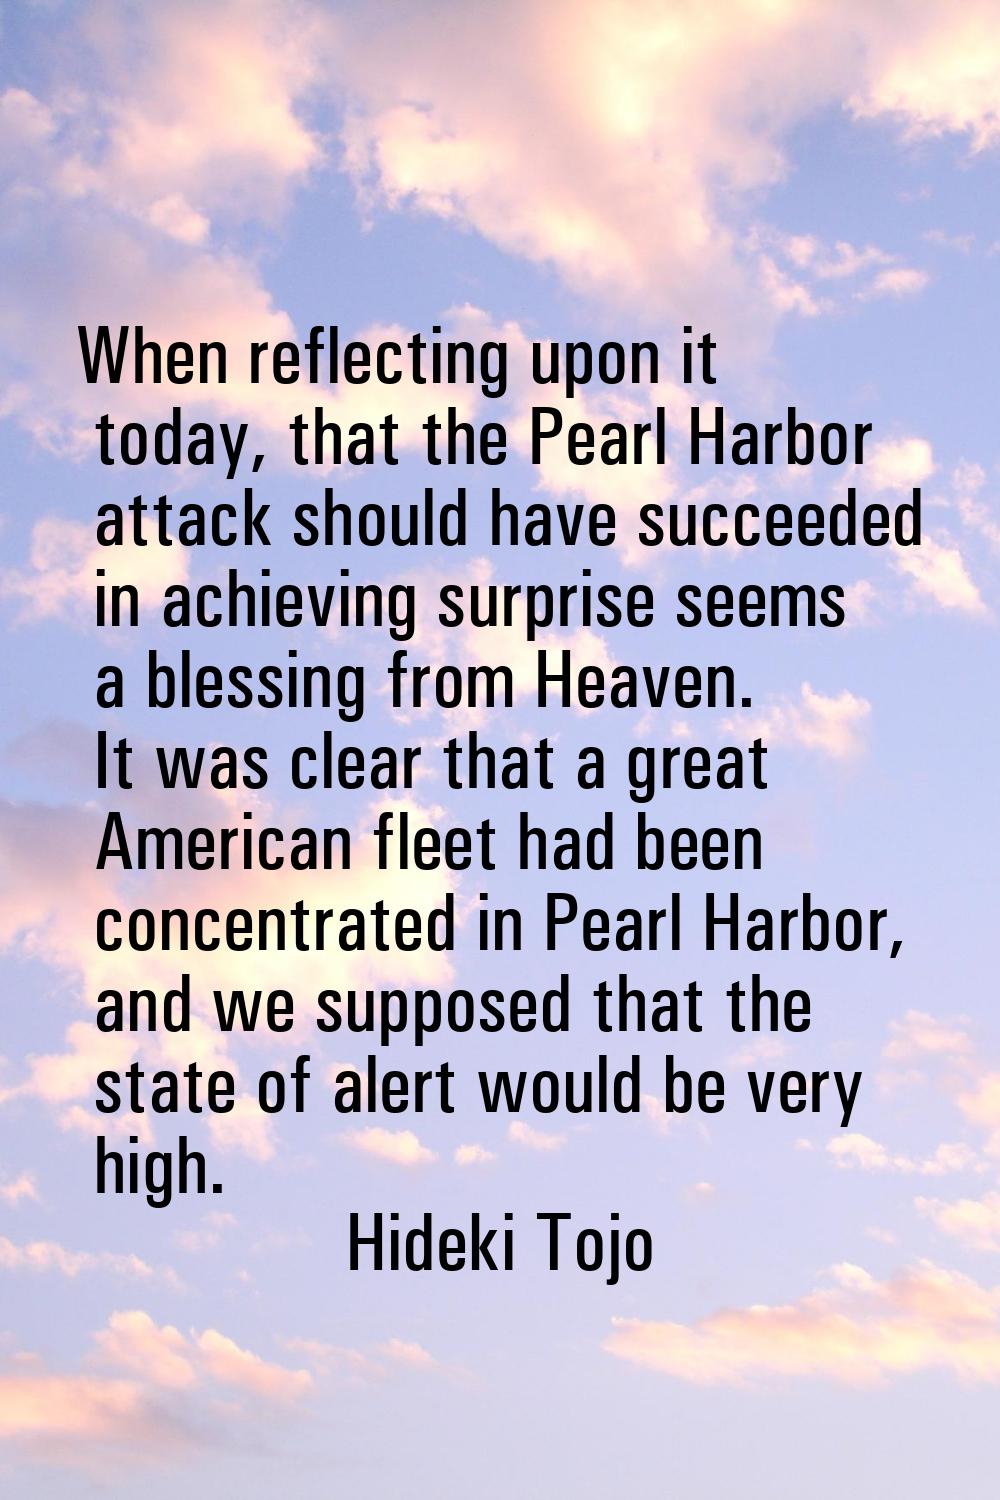 When reflecting upon it today, that the Pearl Harbor attack should have succeeded in achieving surp